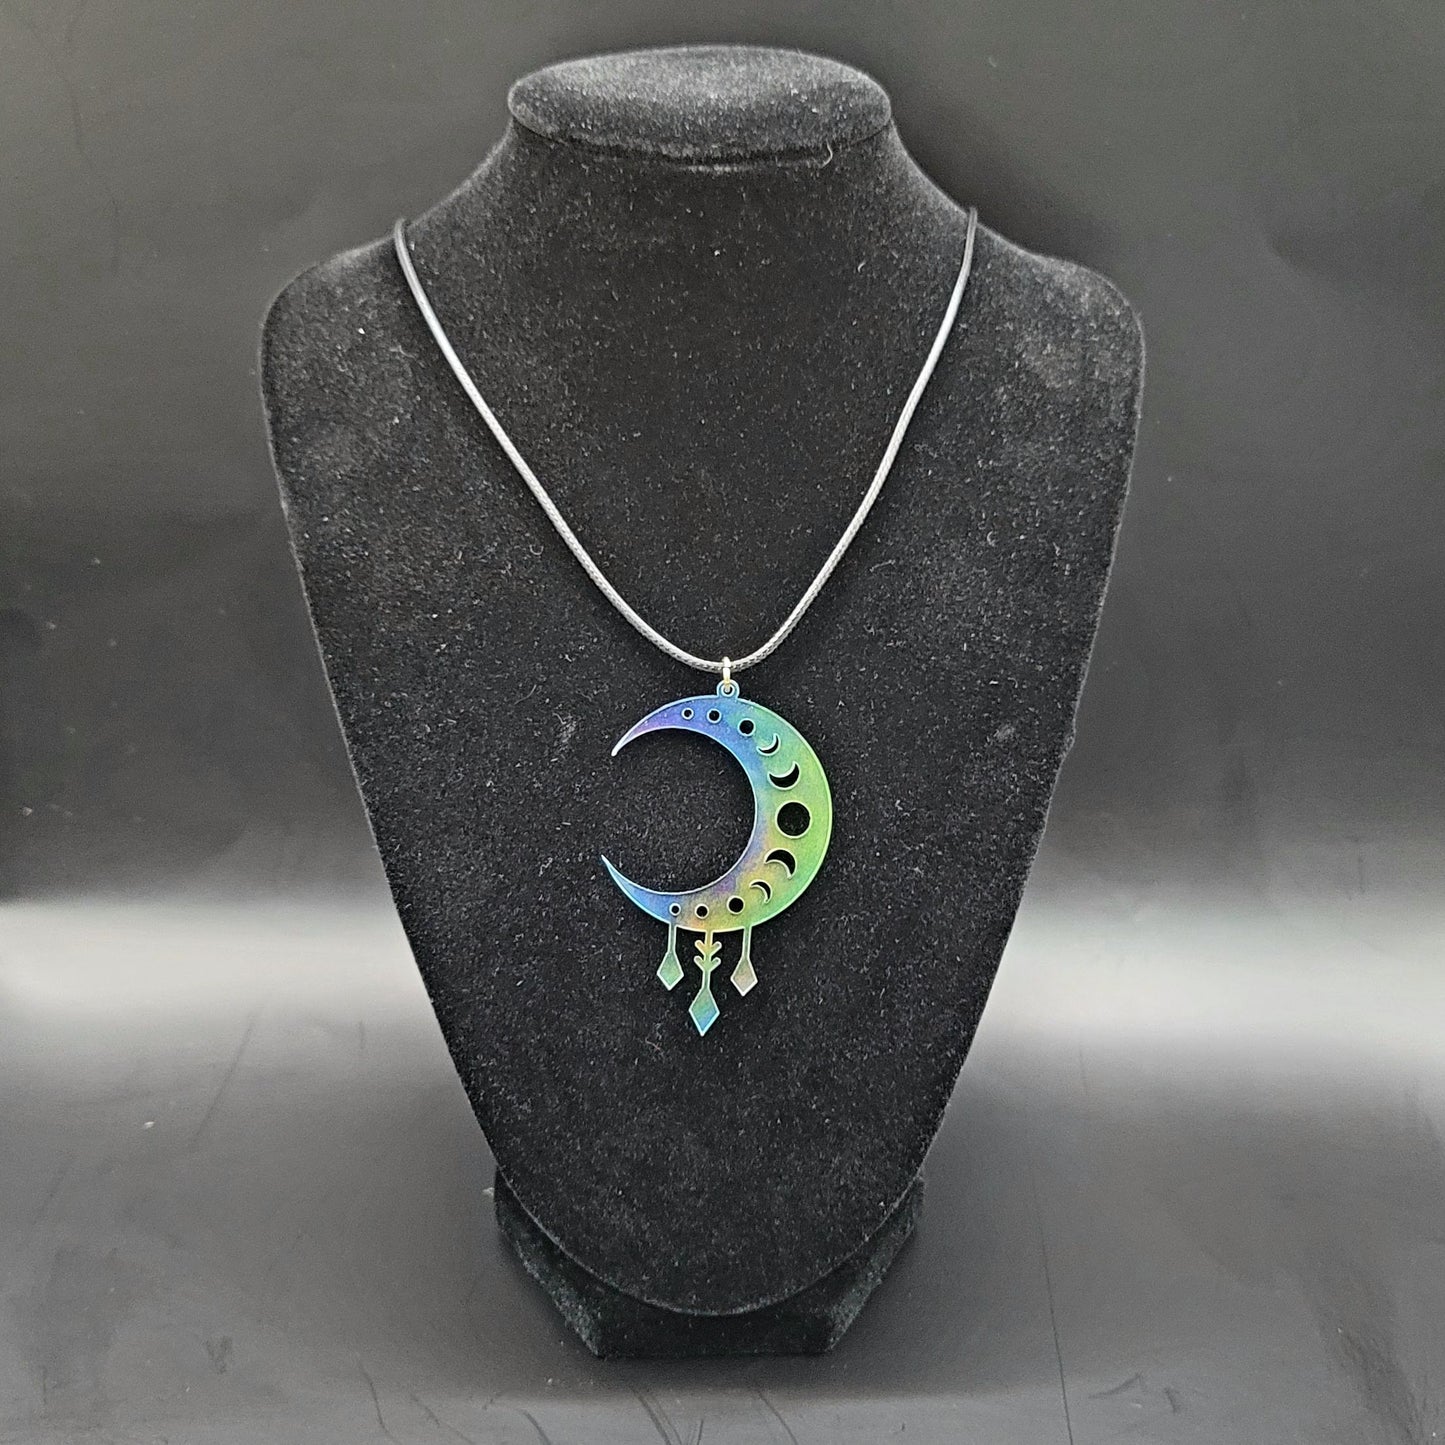 Crescent Moon Necklace - available in Pink, Turquoise, & Orange